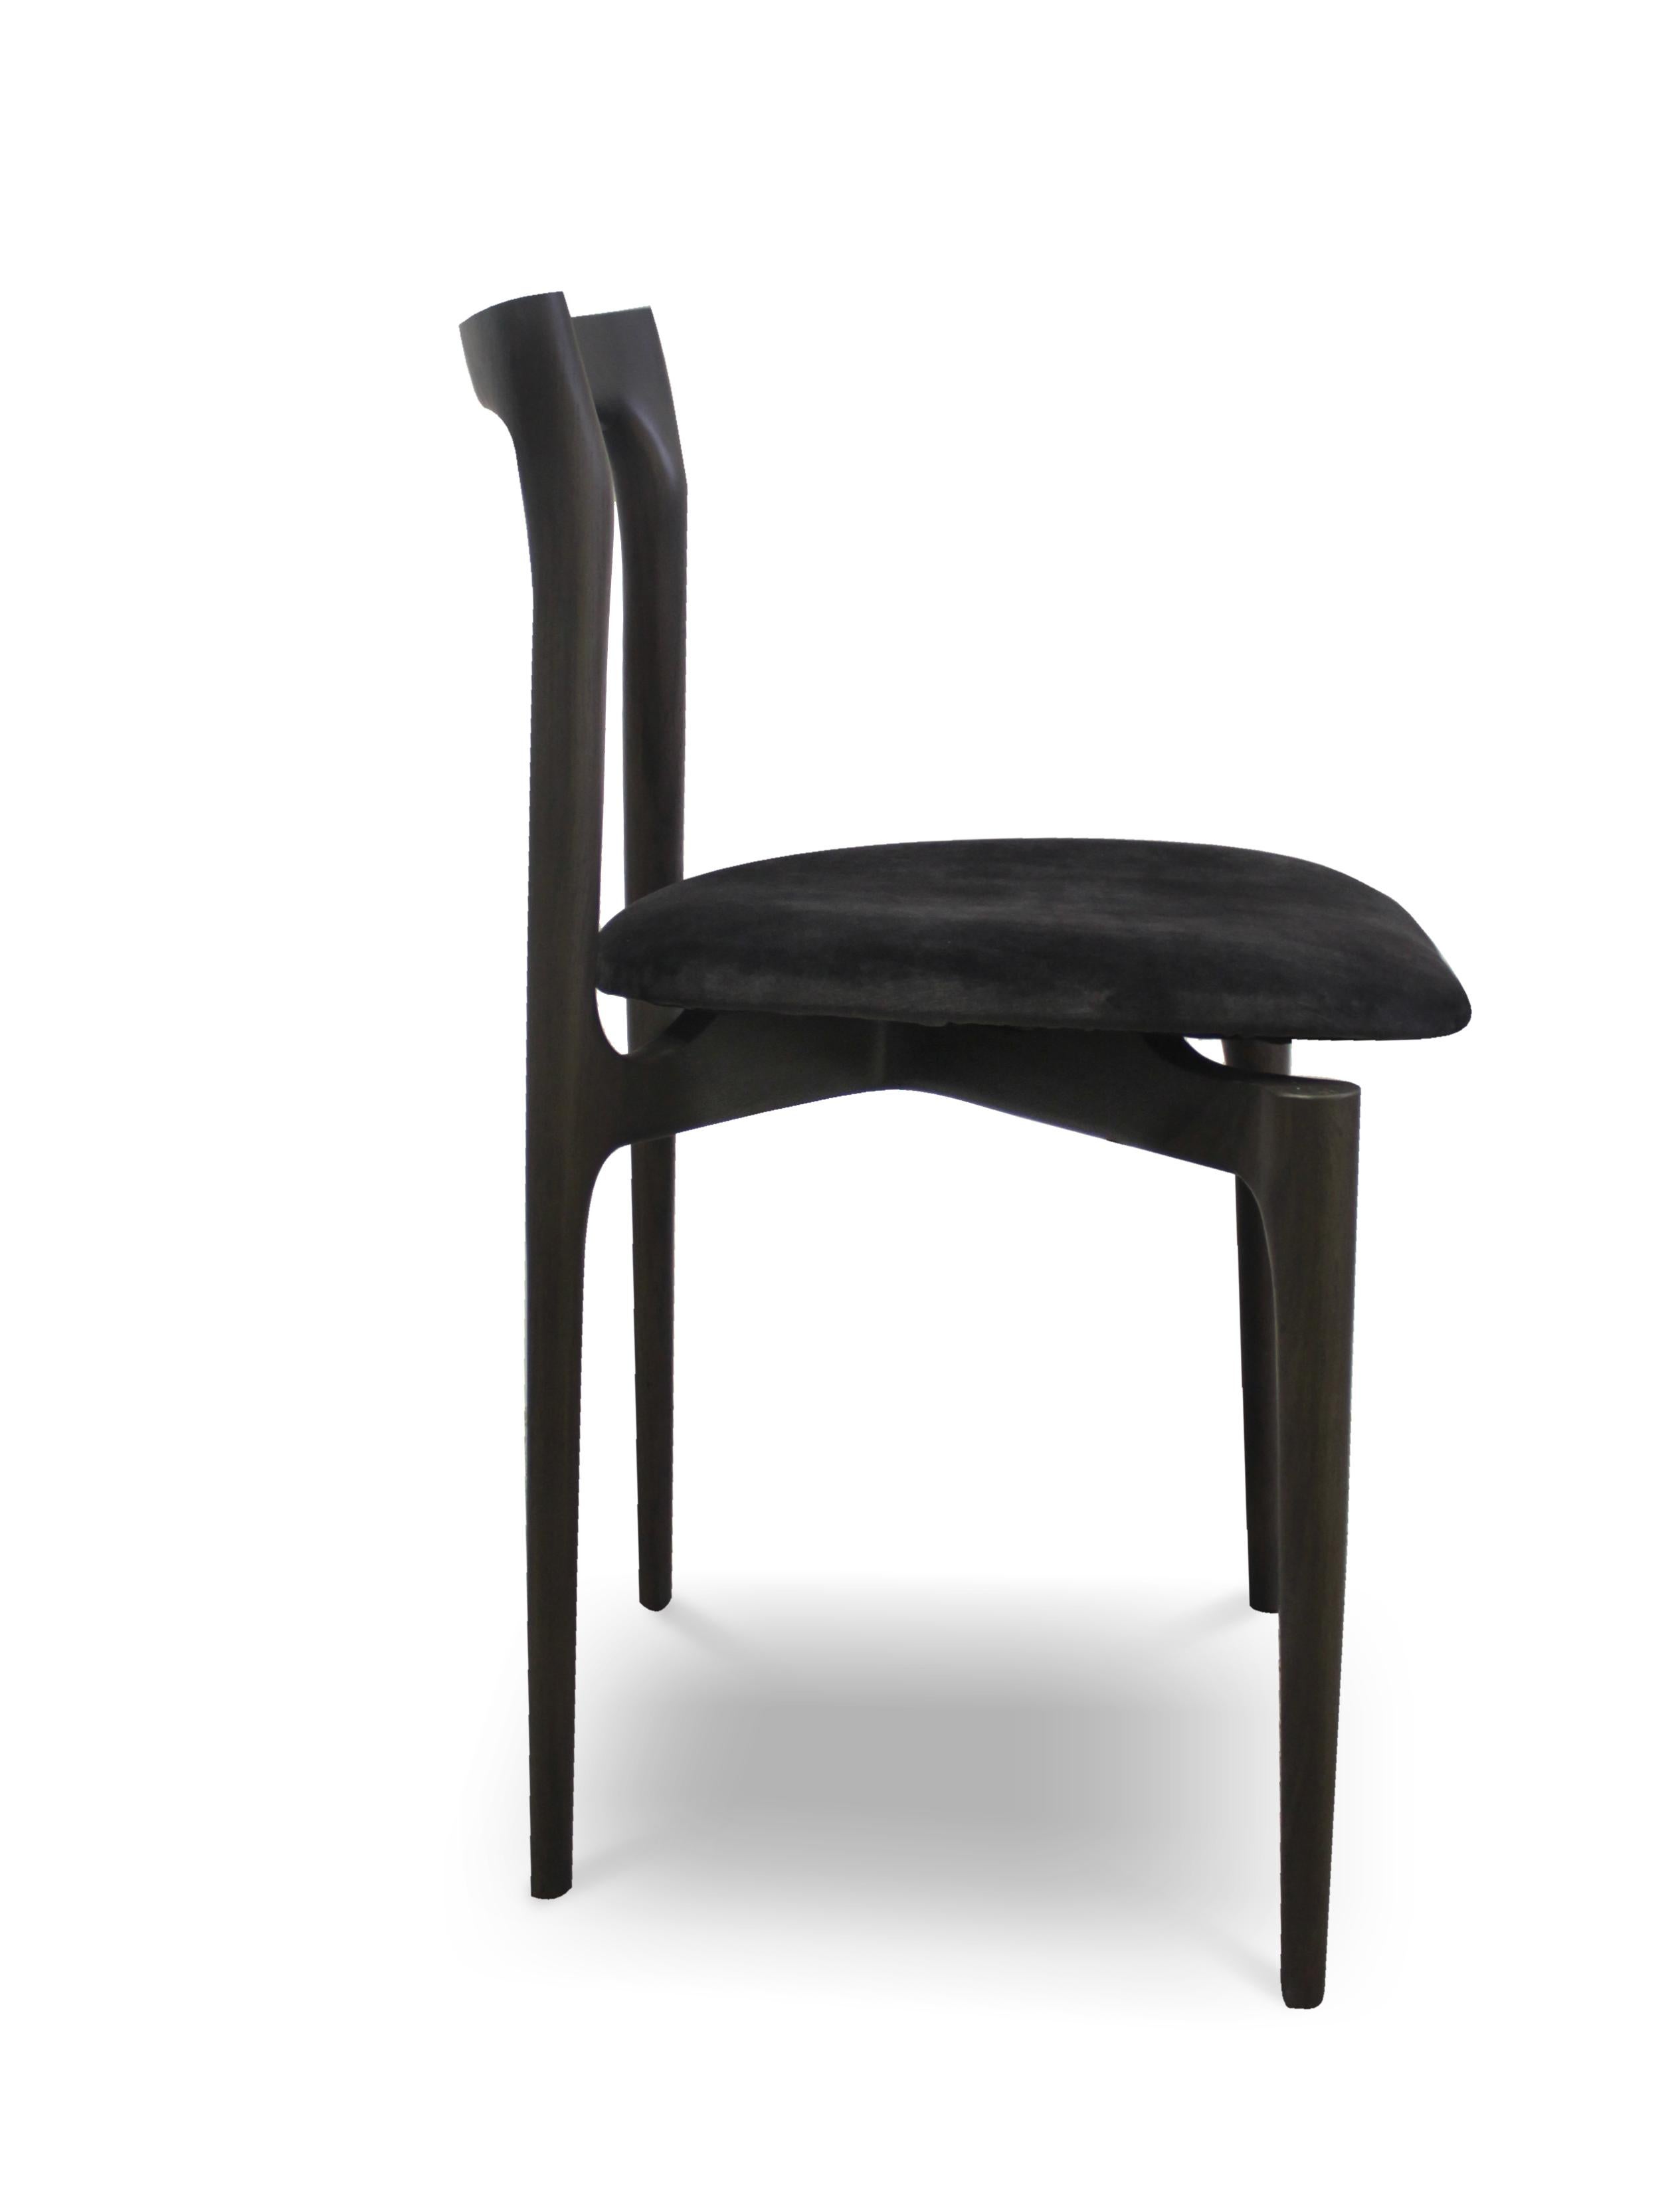 Portuguese Grey Dining Chair by Collector